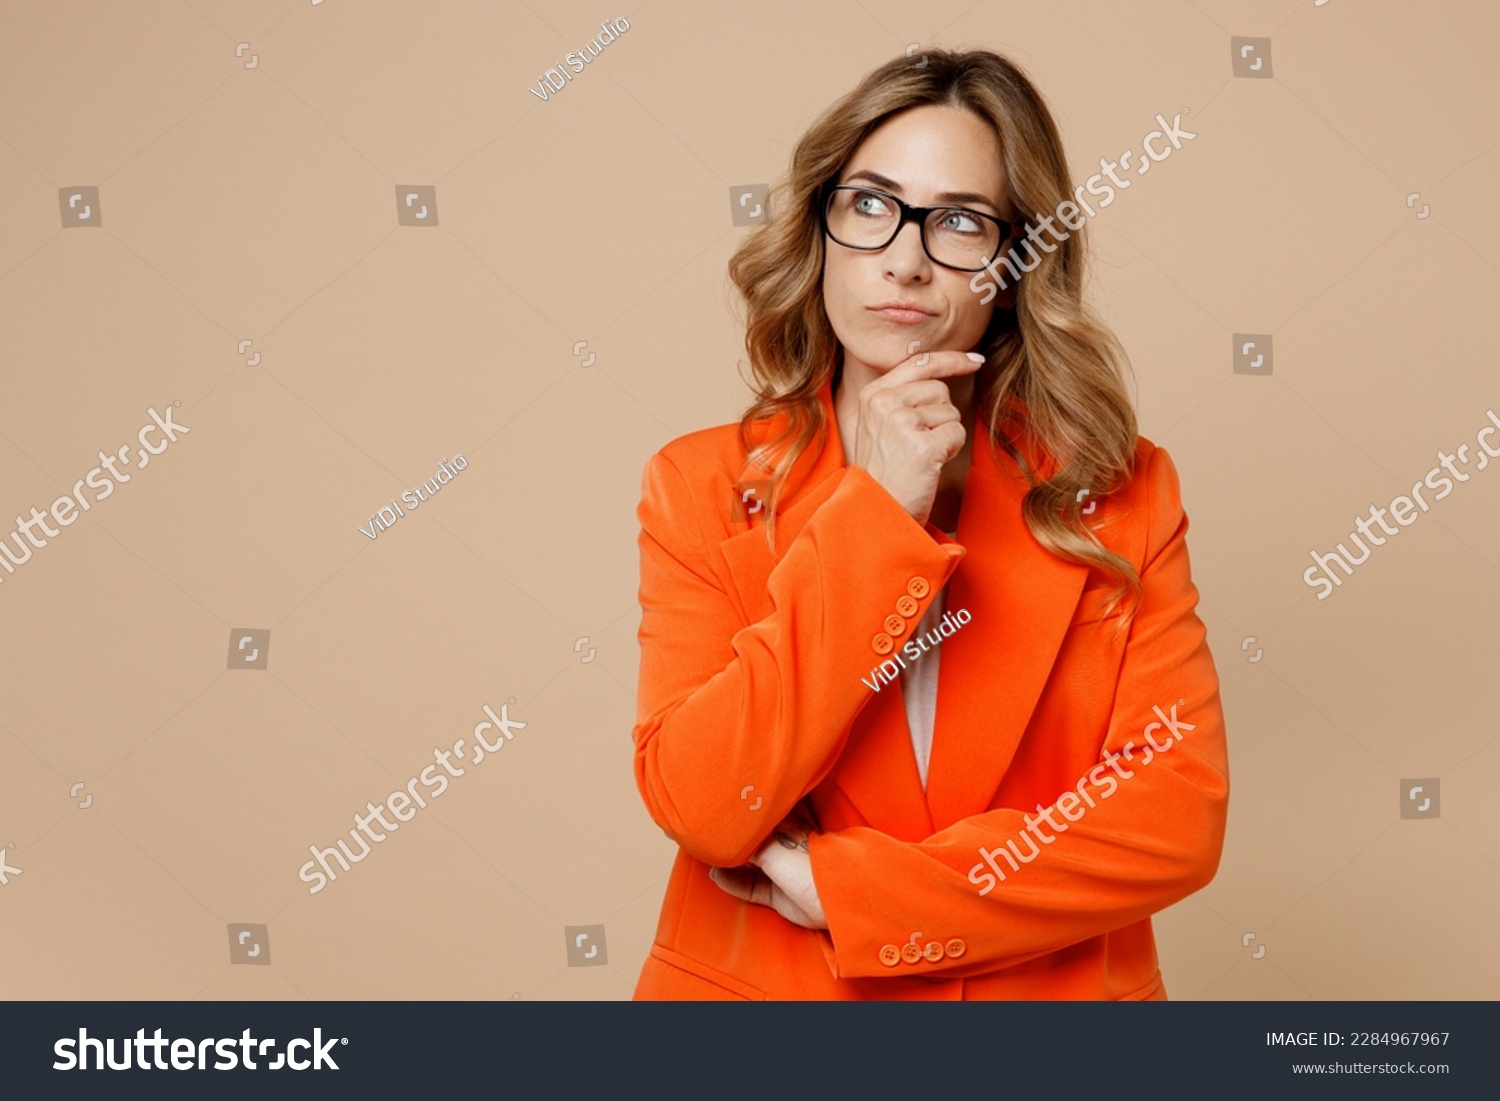 Young successful employee business woman corporate lawyer 30s wears classic formal orange suit glasses work in office prop up chin look aside on area isolated on plain beige color background studio #2284967967